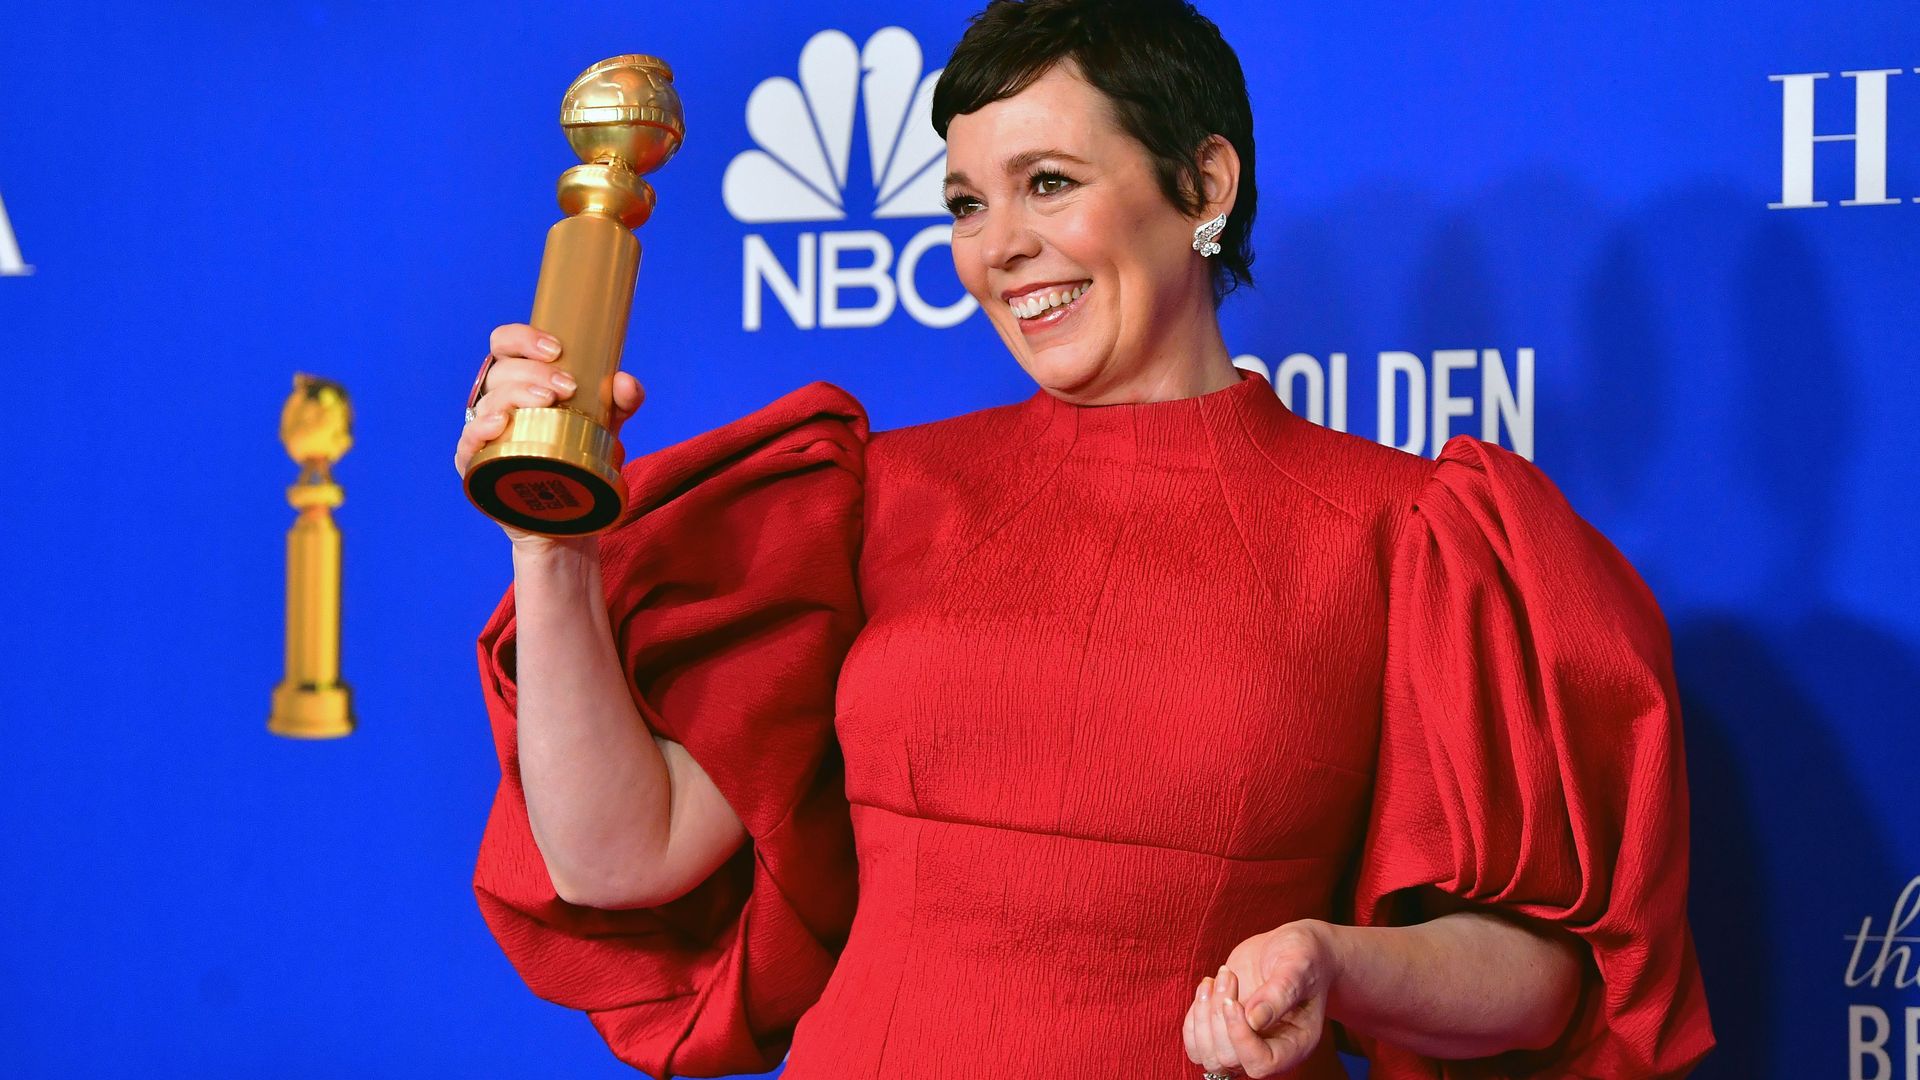 Actress Olivia Colman poses with the 2020 Golden Globe Award she won for her portrayal of Queen Elizabeth in "The Crown."